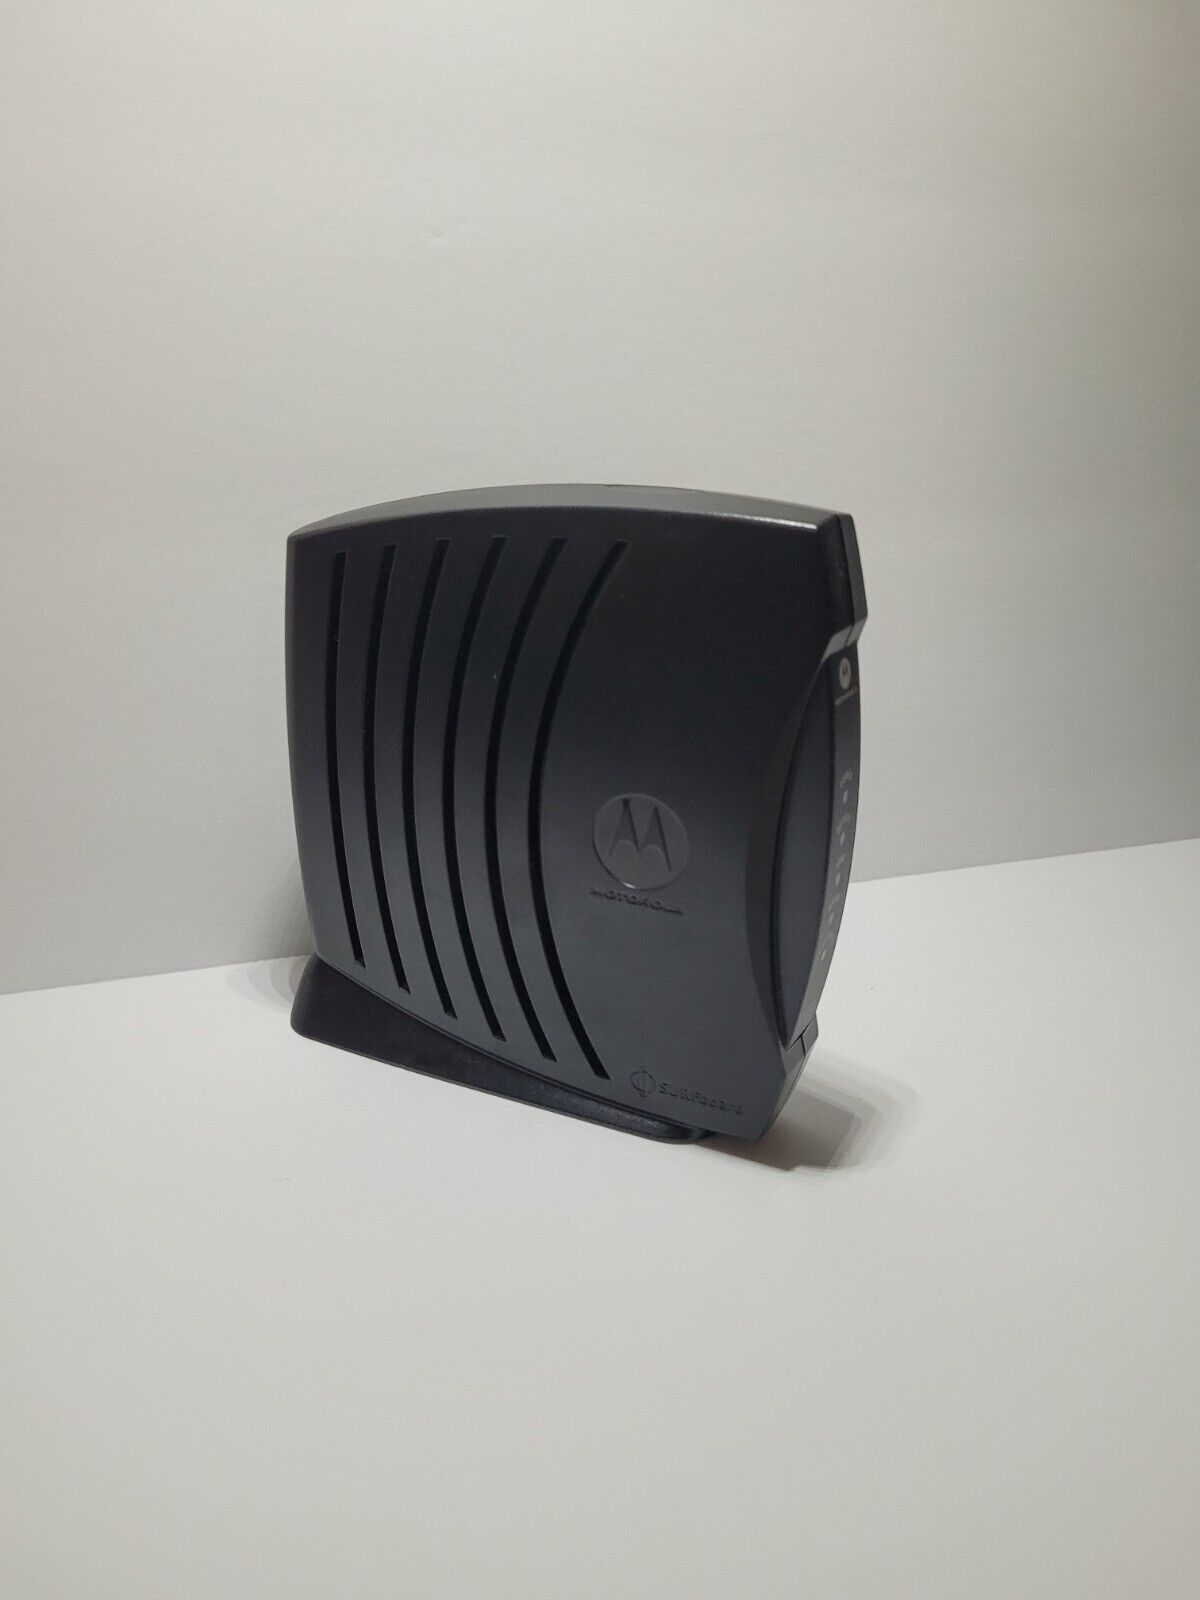 Motorola SURFboard SB5101 Cable Modem  Actual Images  Fast